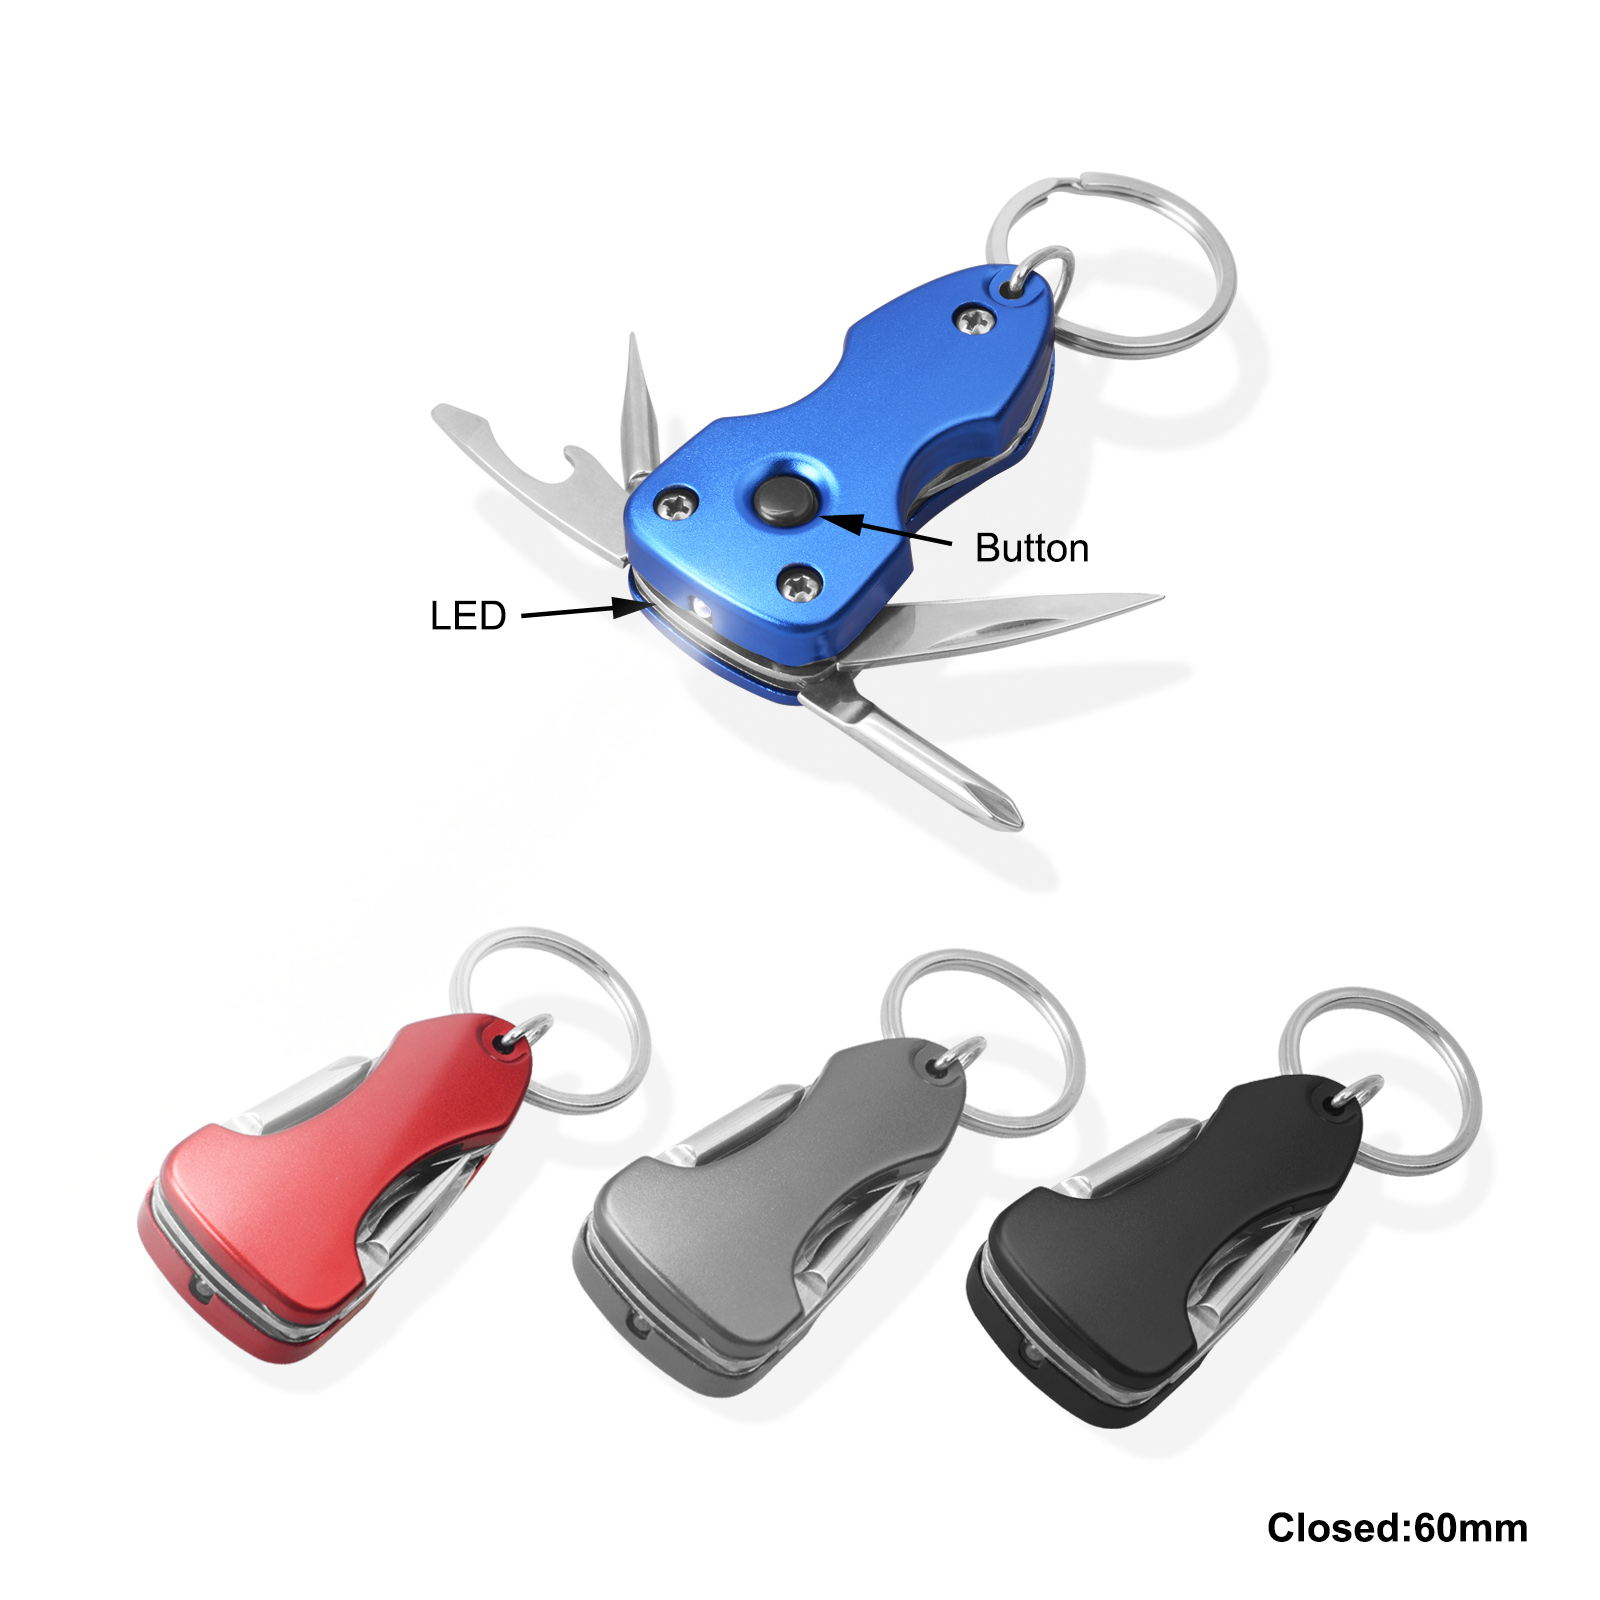 #668-LED Multi Function Key Chain Tools with LED Torch 